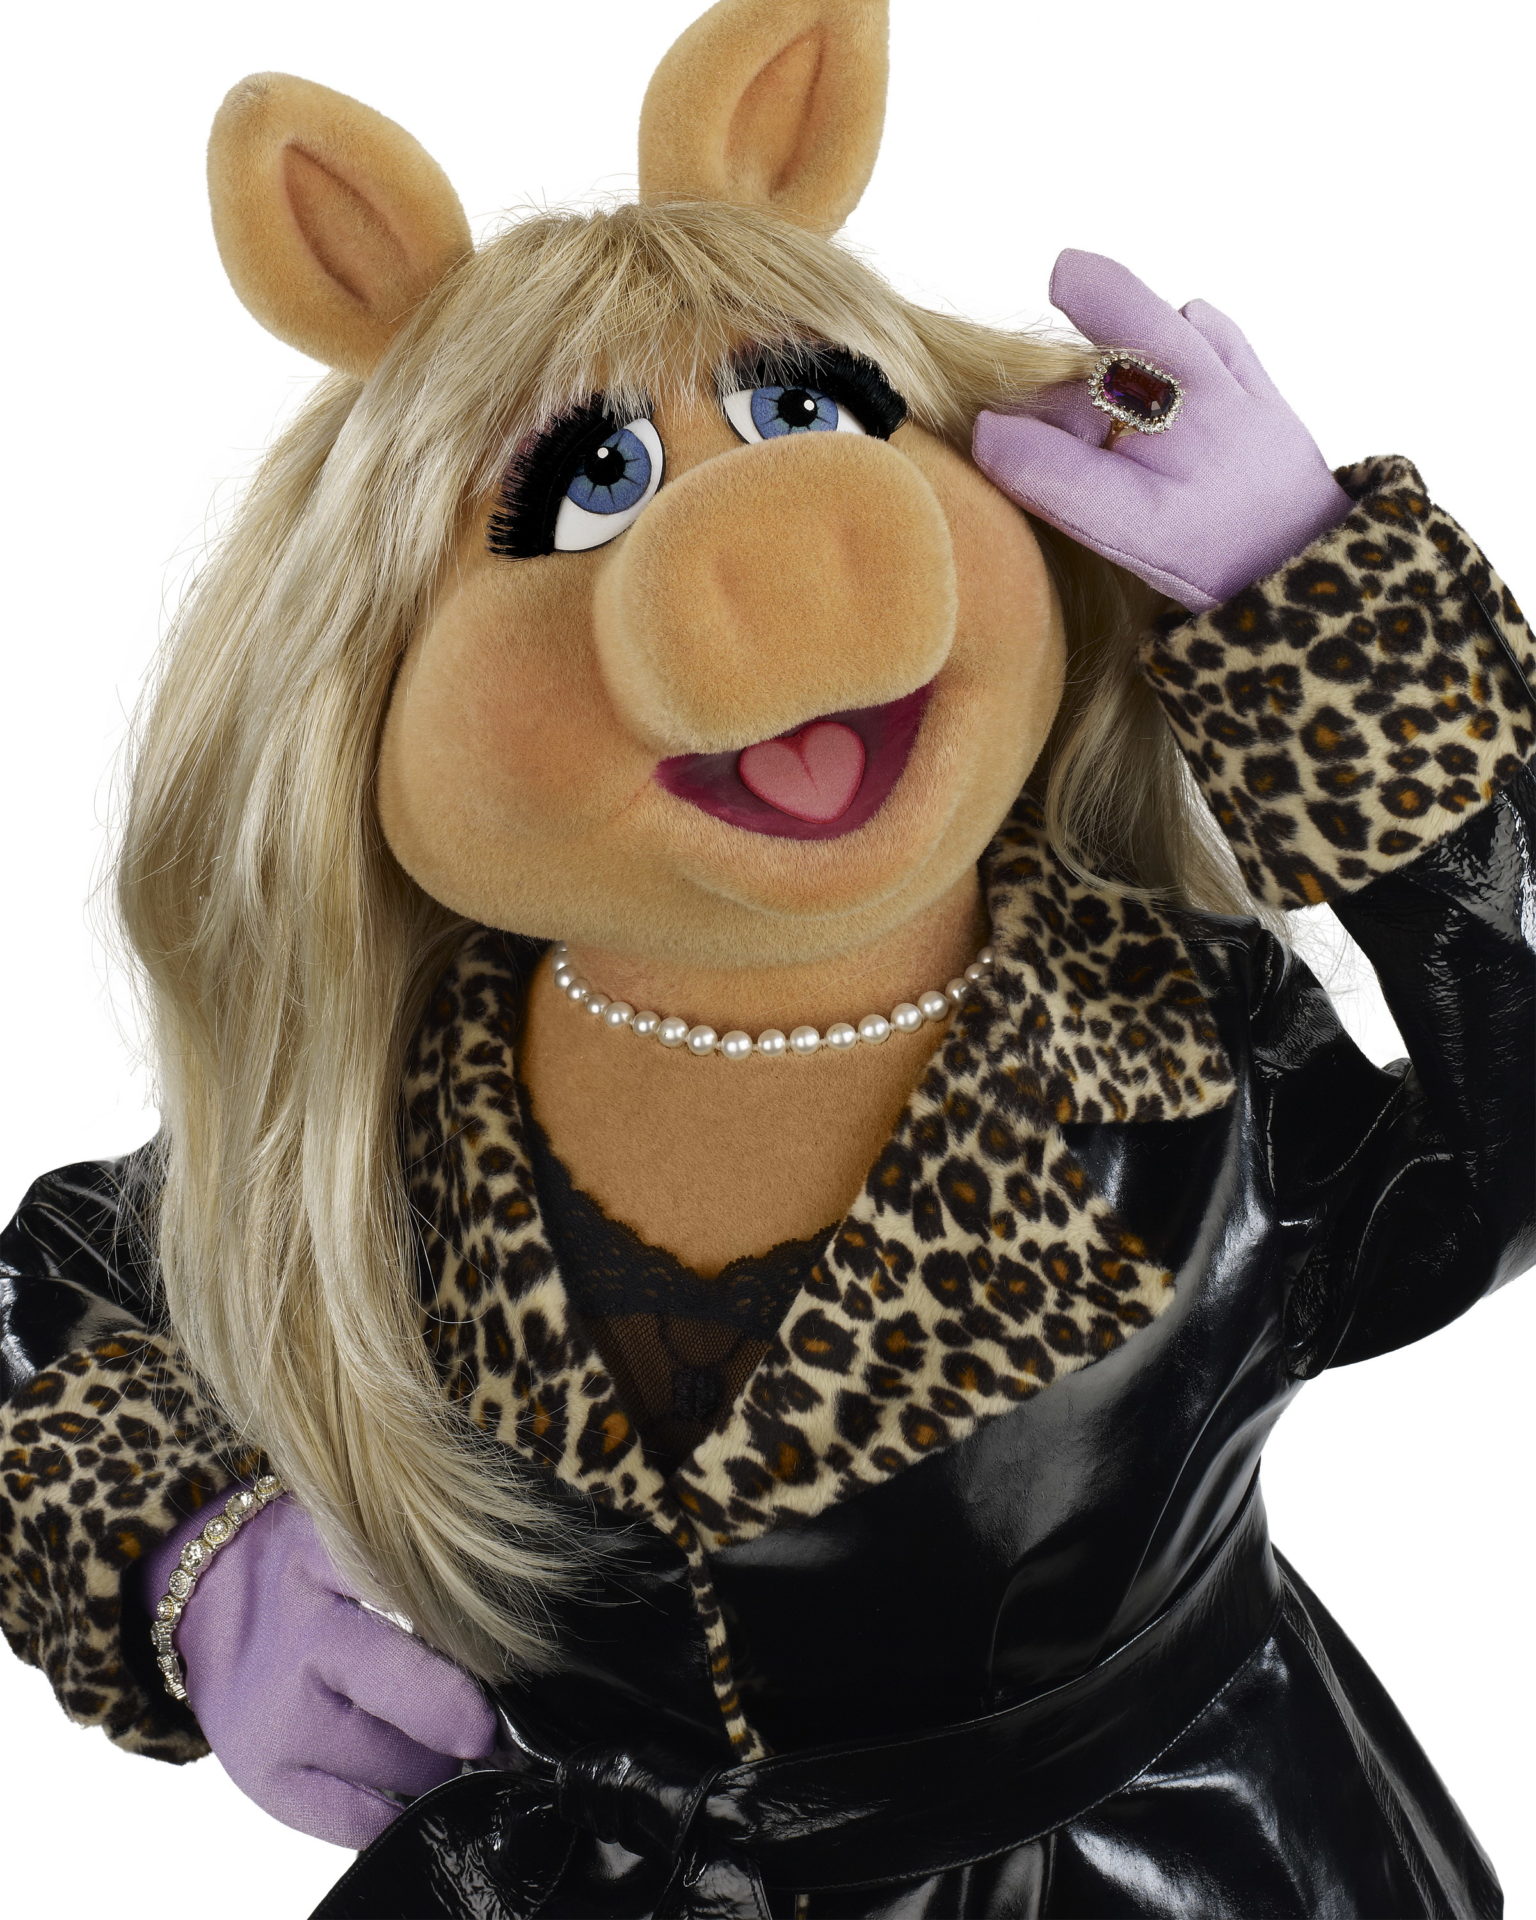 Miss Piggy to Guest Judge on Project Runway Spinoff ToughPigs